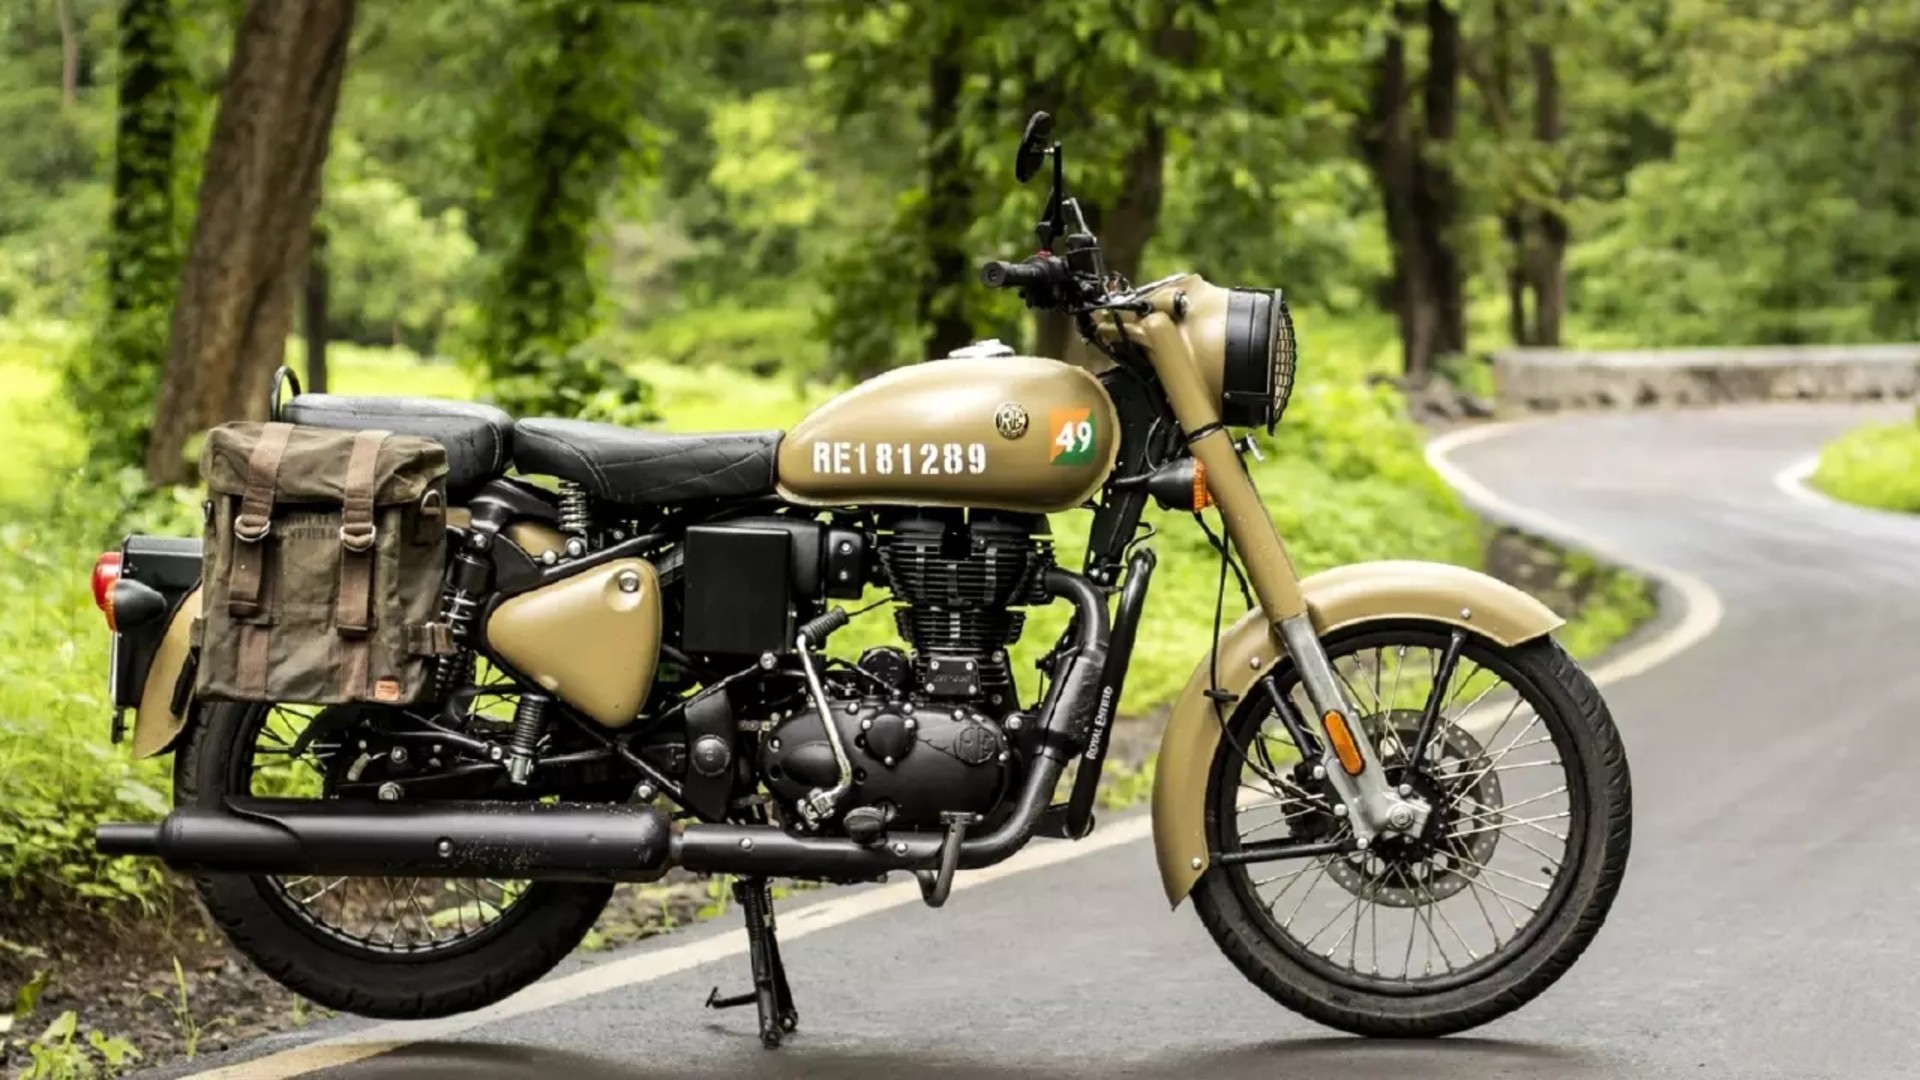 New Royal Enfield motorcycles are on their way: the Hunter 350 to the Meteor 650